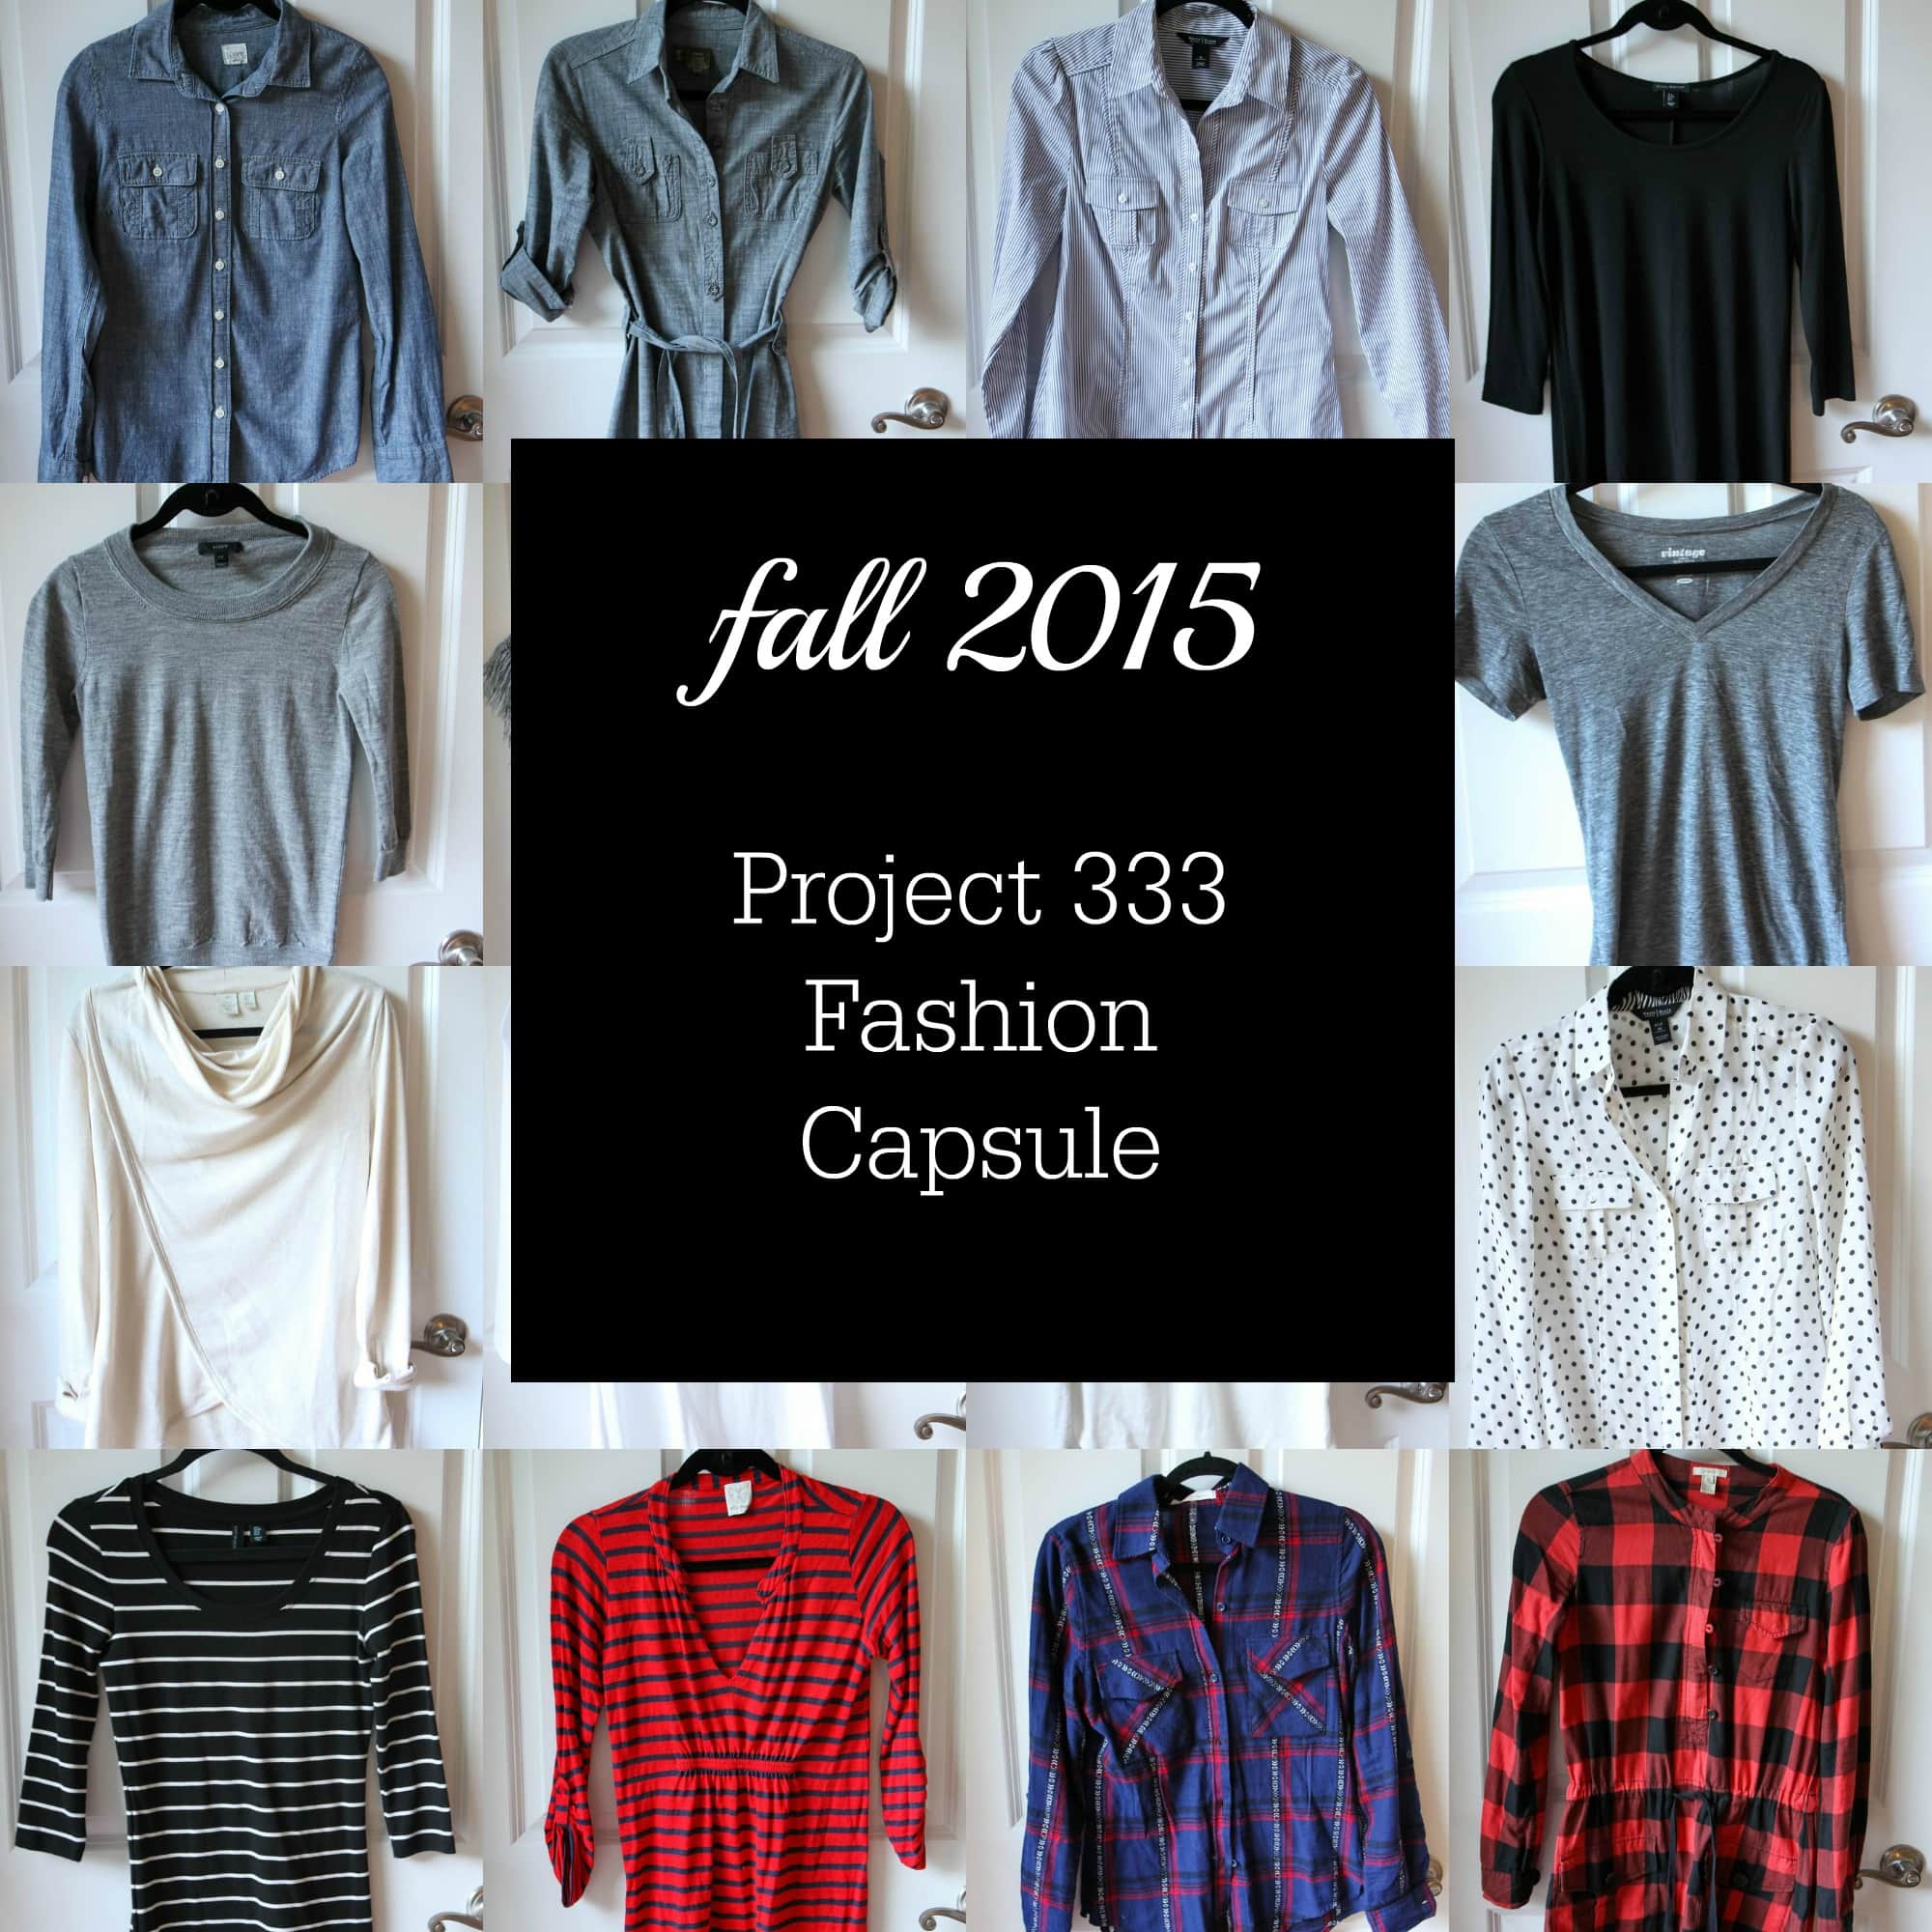 Fall 2015 Fashion Capsule Wardrobe Project from MomAdvice.com